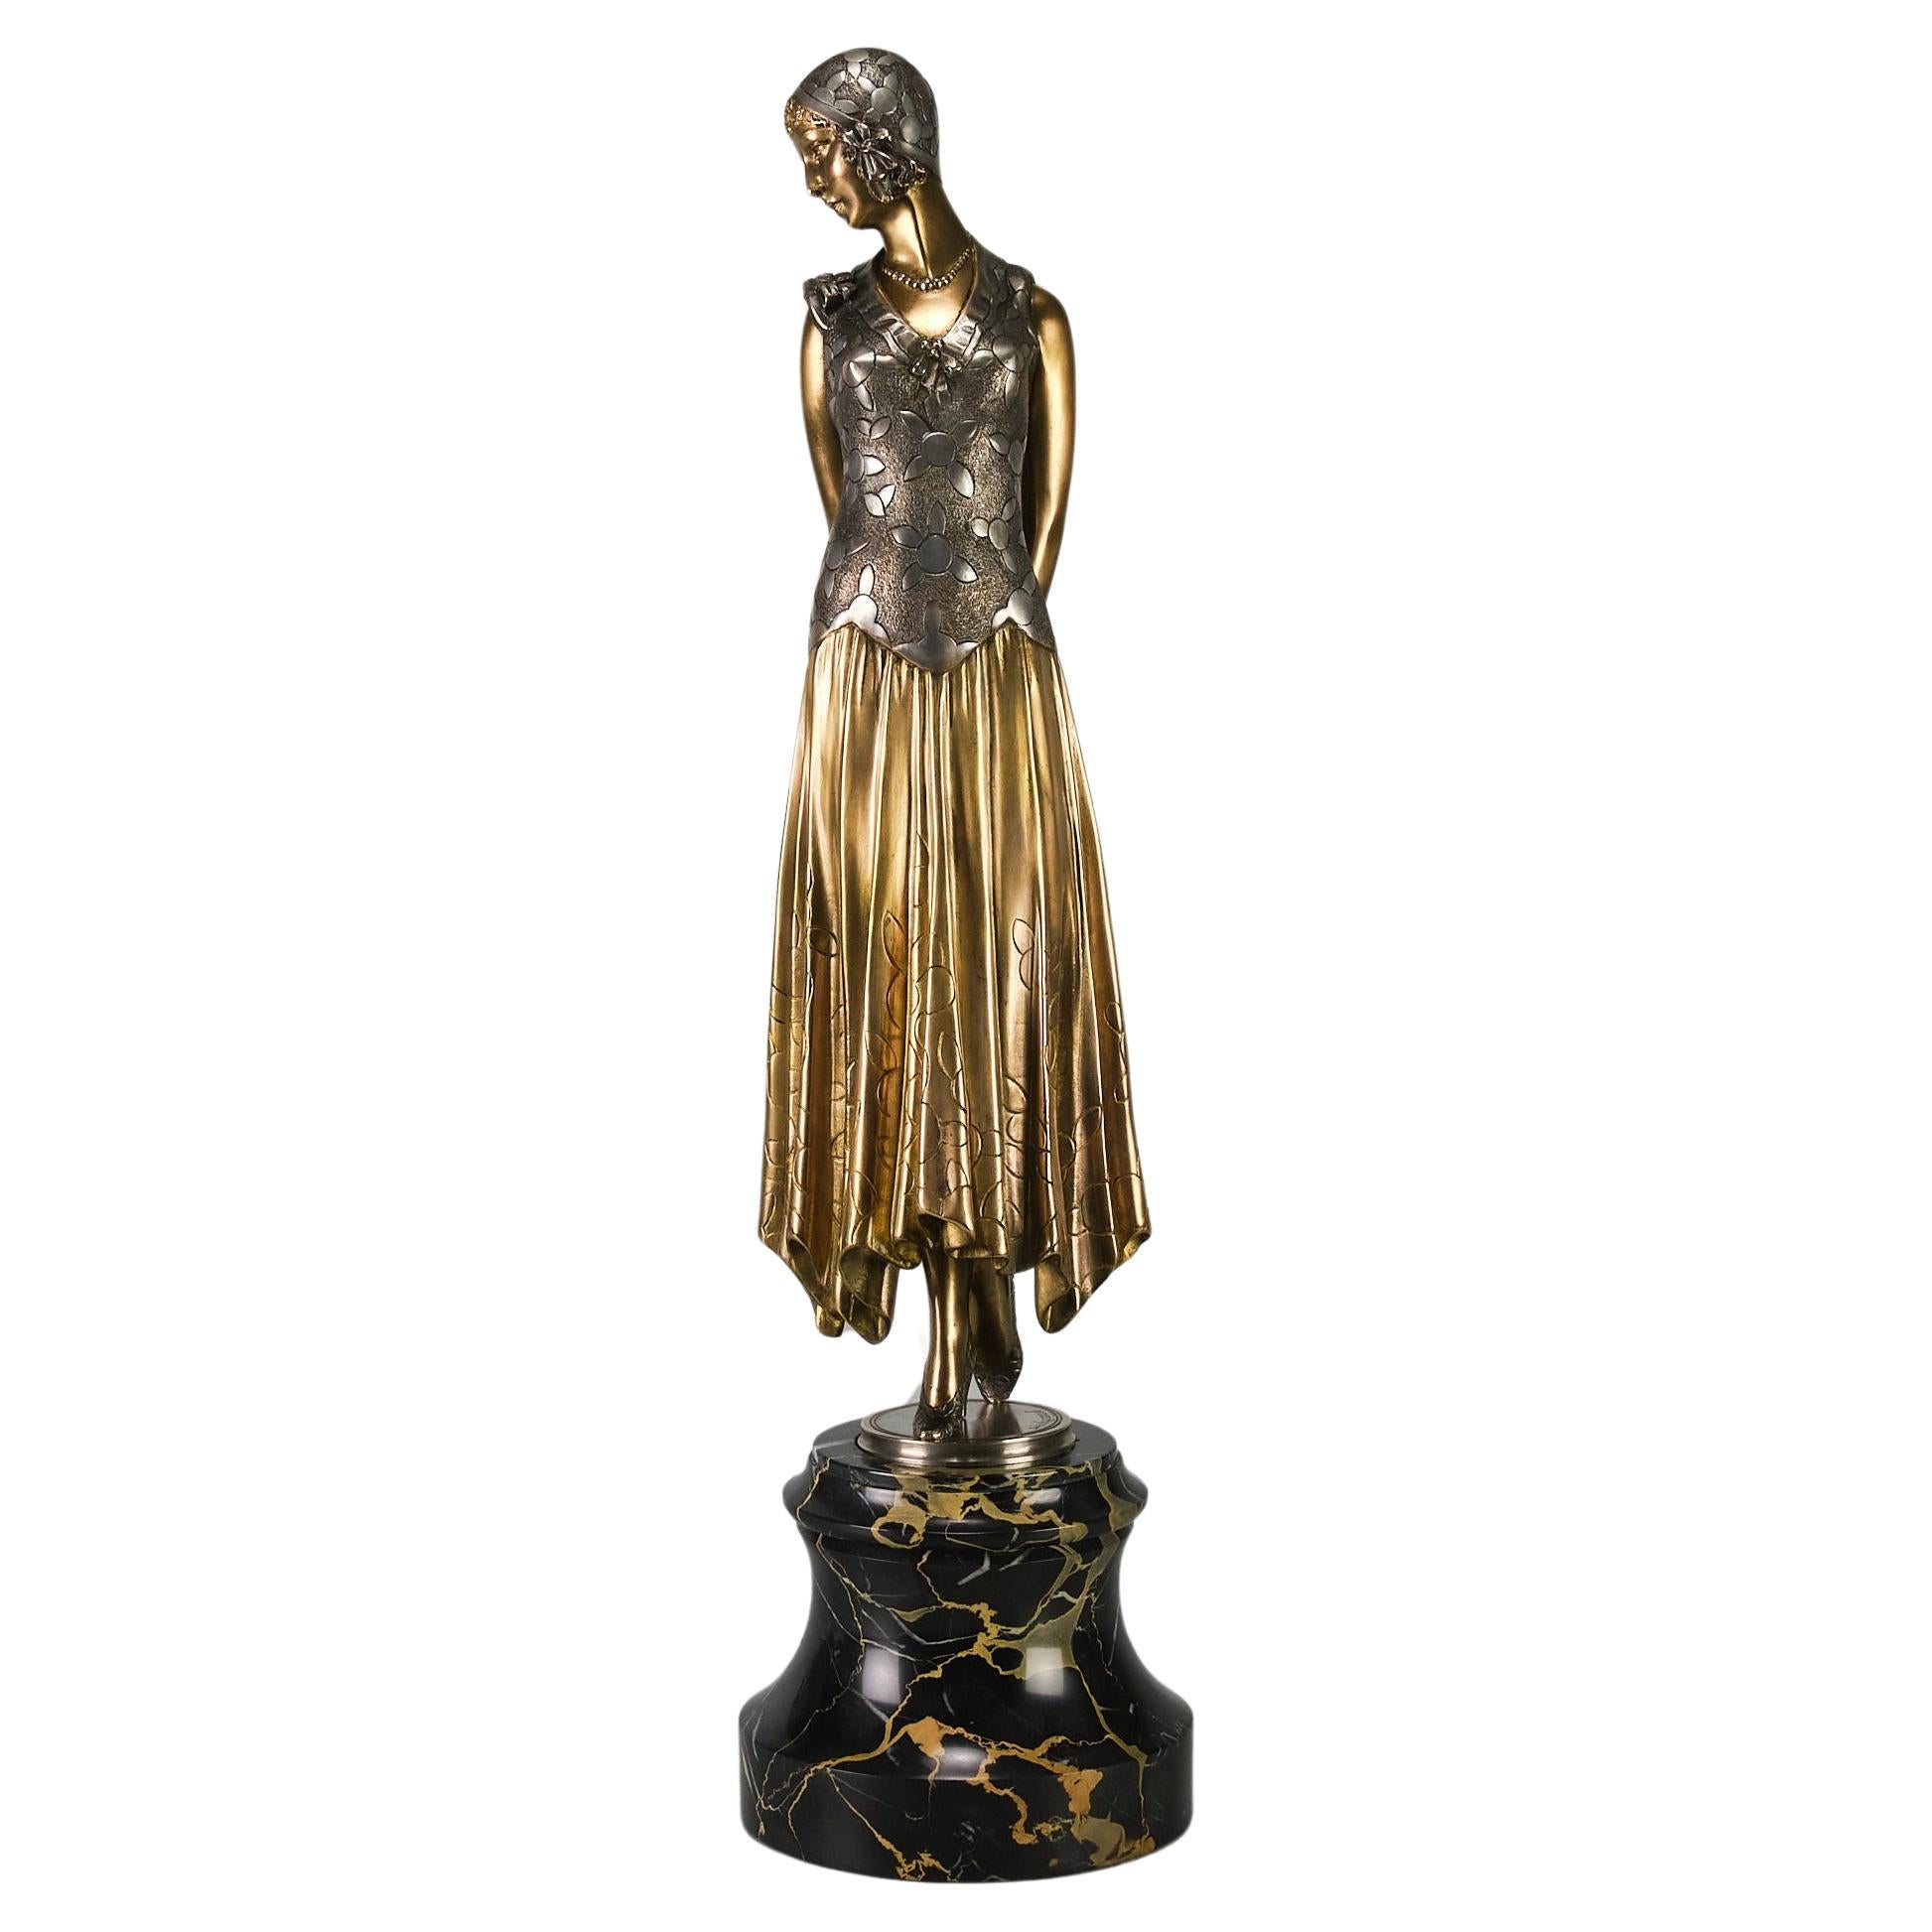 Early 20th Century Art Deco Bronze Sculpture entitled "Book Lady" by D Chiparus